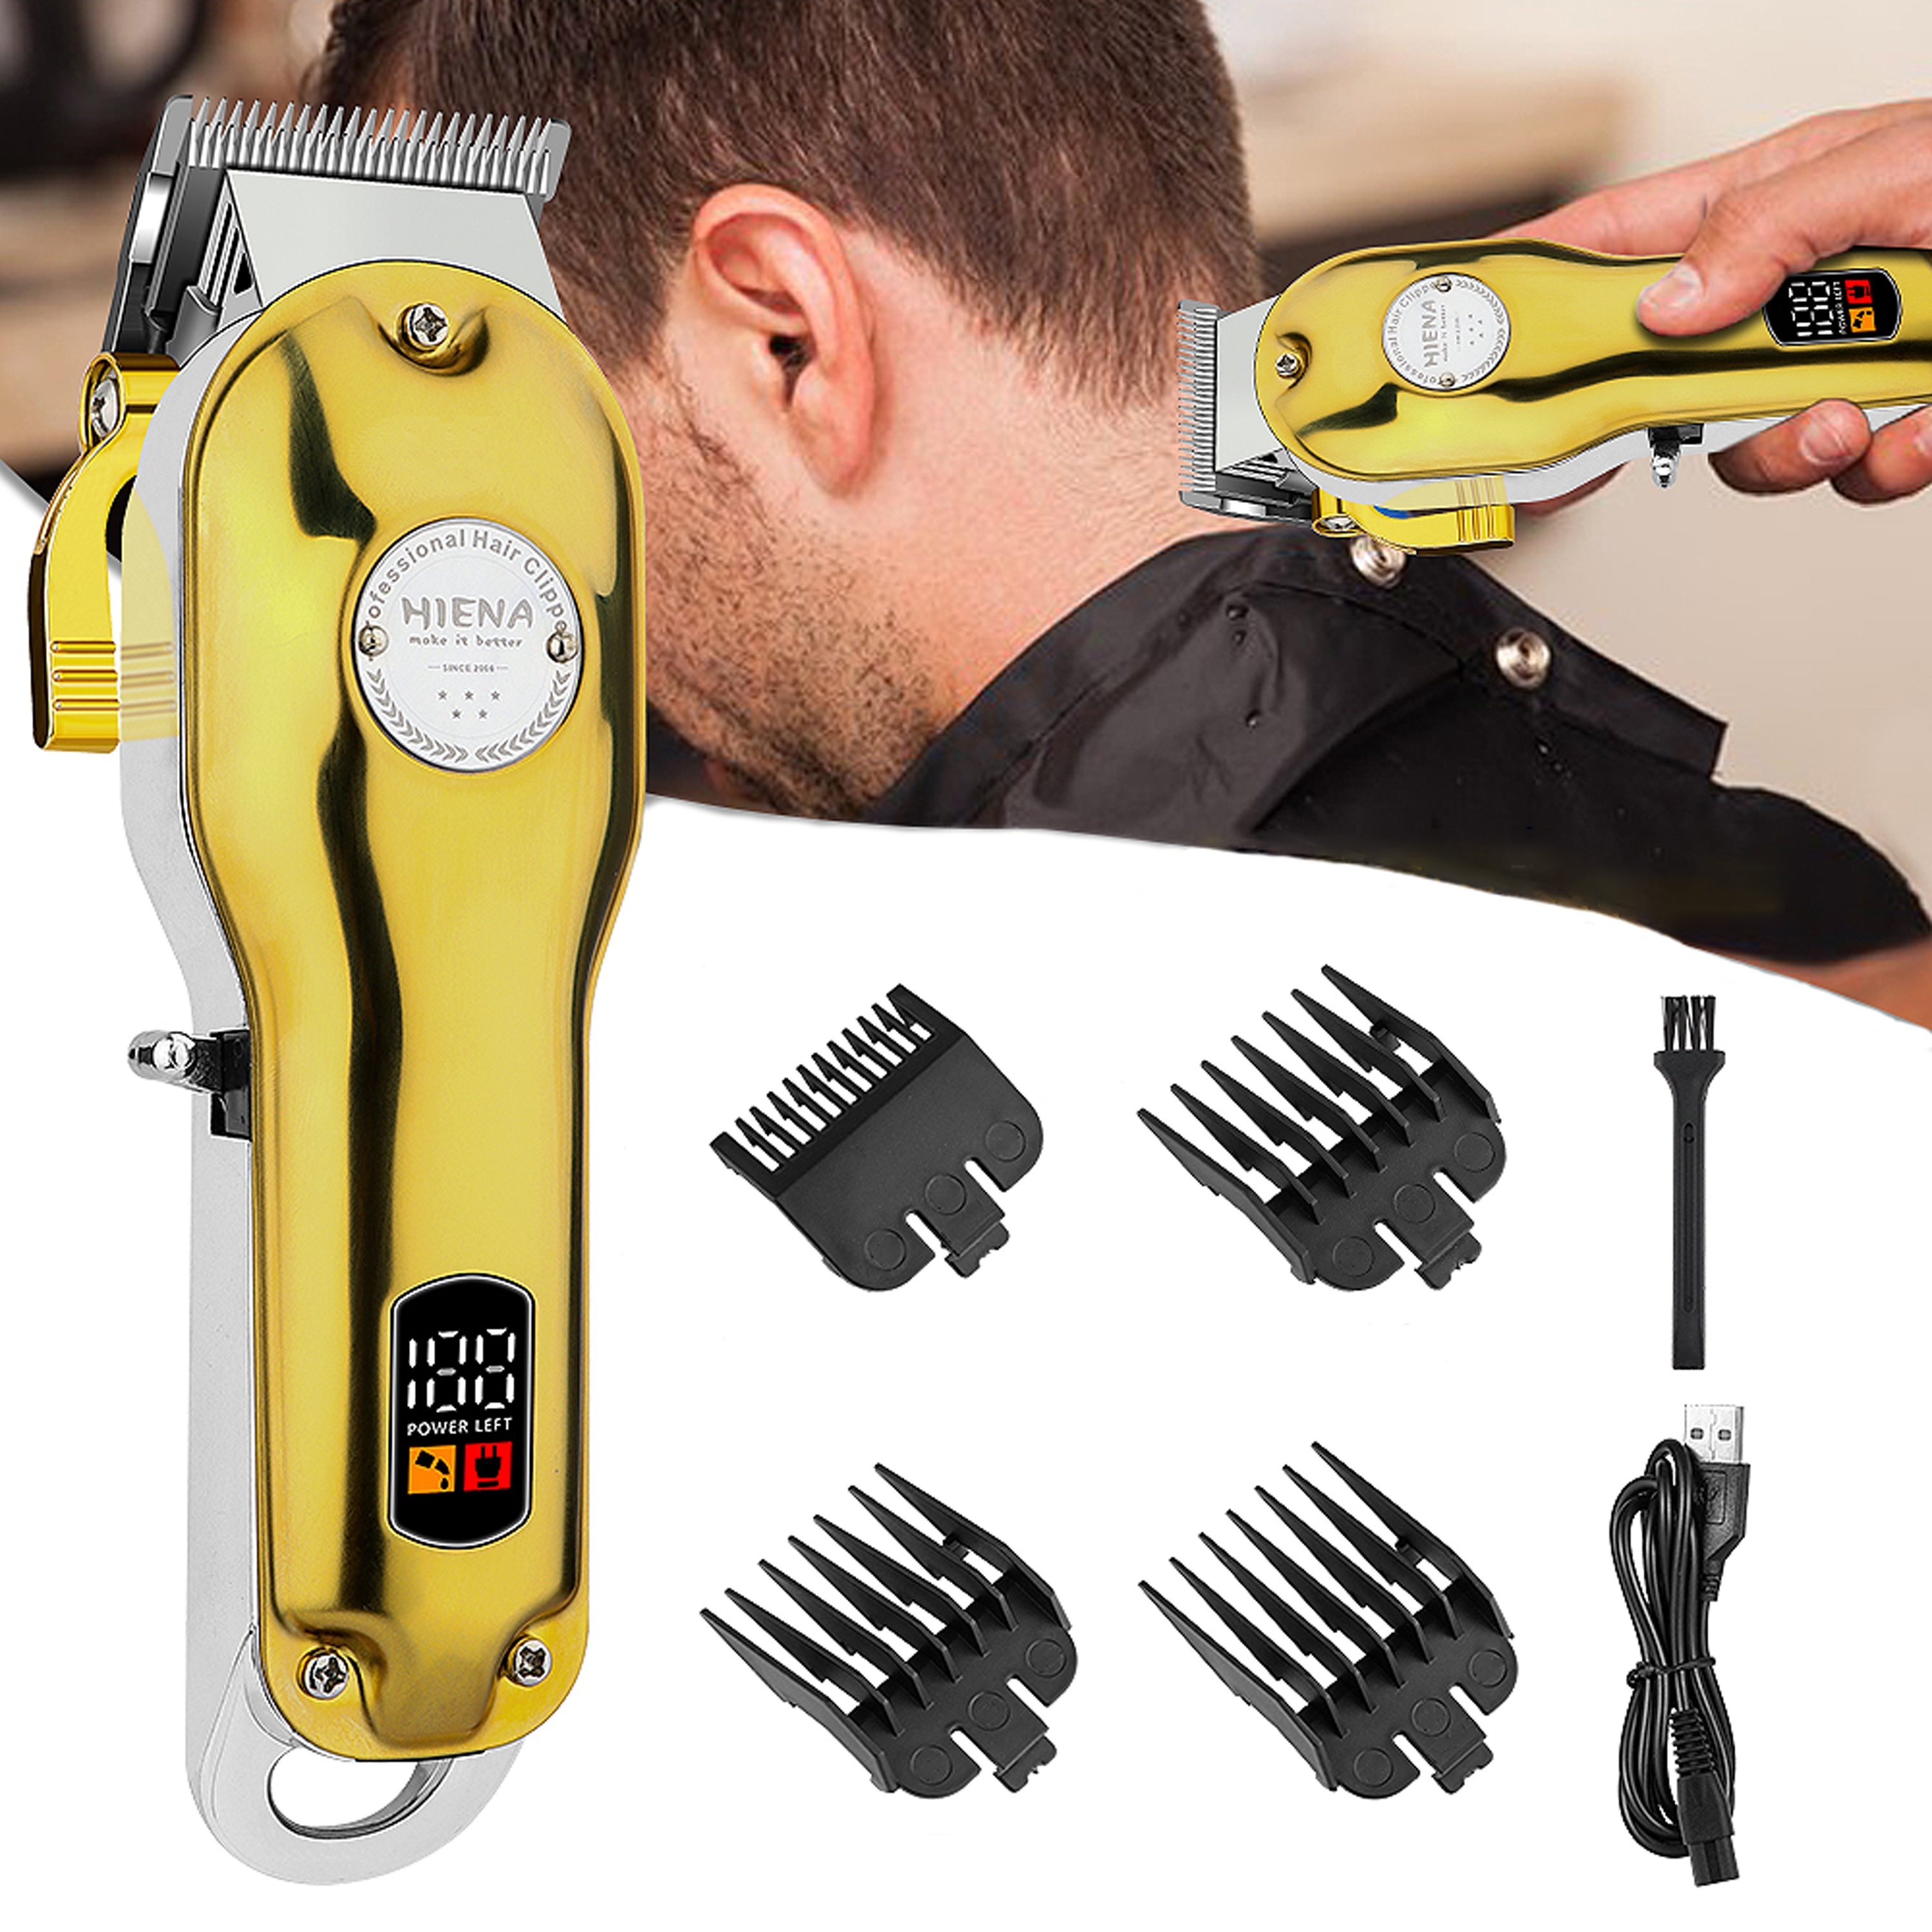 

Electric Hair Clipper, Men's Beard Trimmer, Barber Hair Clipper For Personal Use At Home, Haircut Machine, Gifts For Men, Father's Day Gift